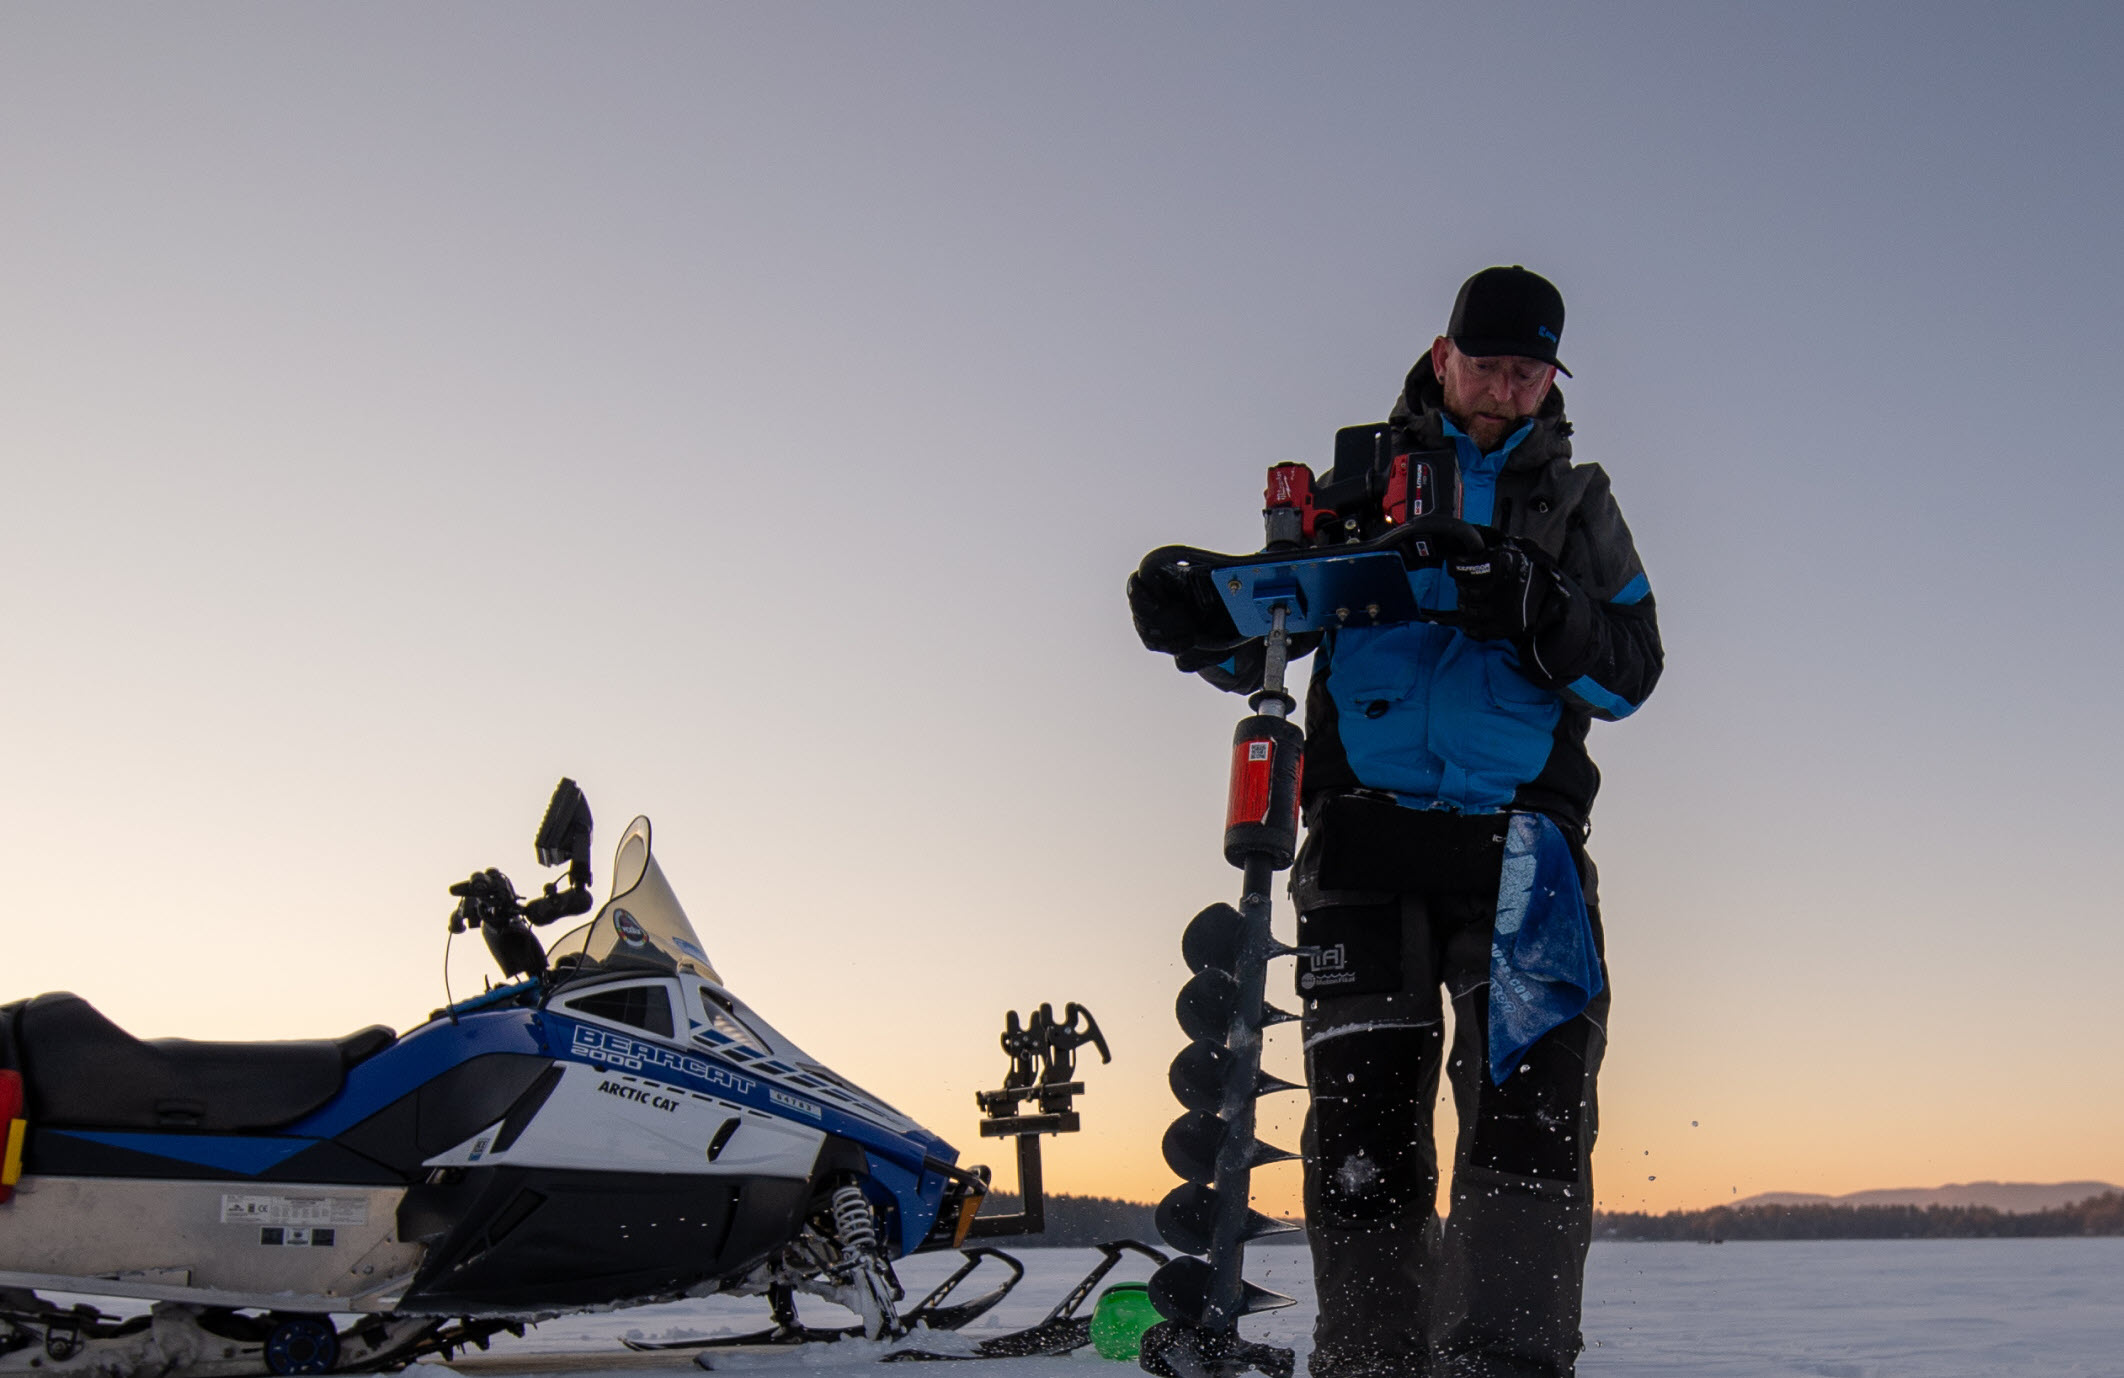 Three Tips for Finicky Fish - When the Bite Gets Tough on the Hard Water